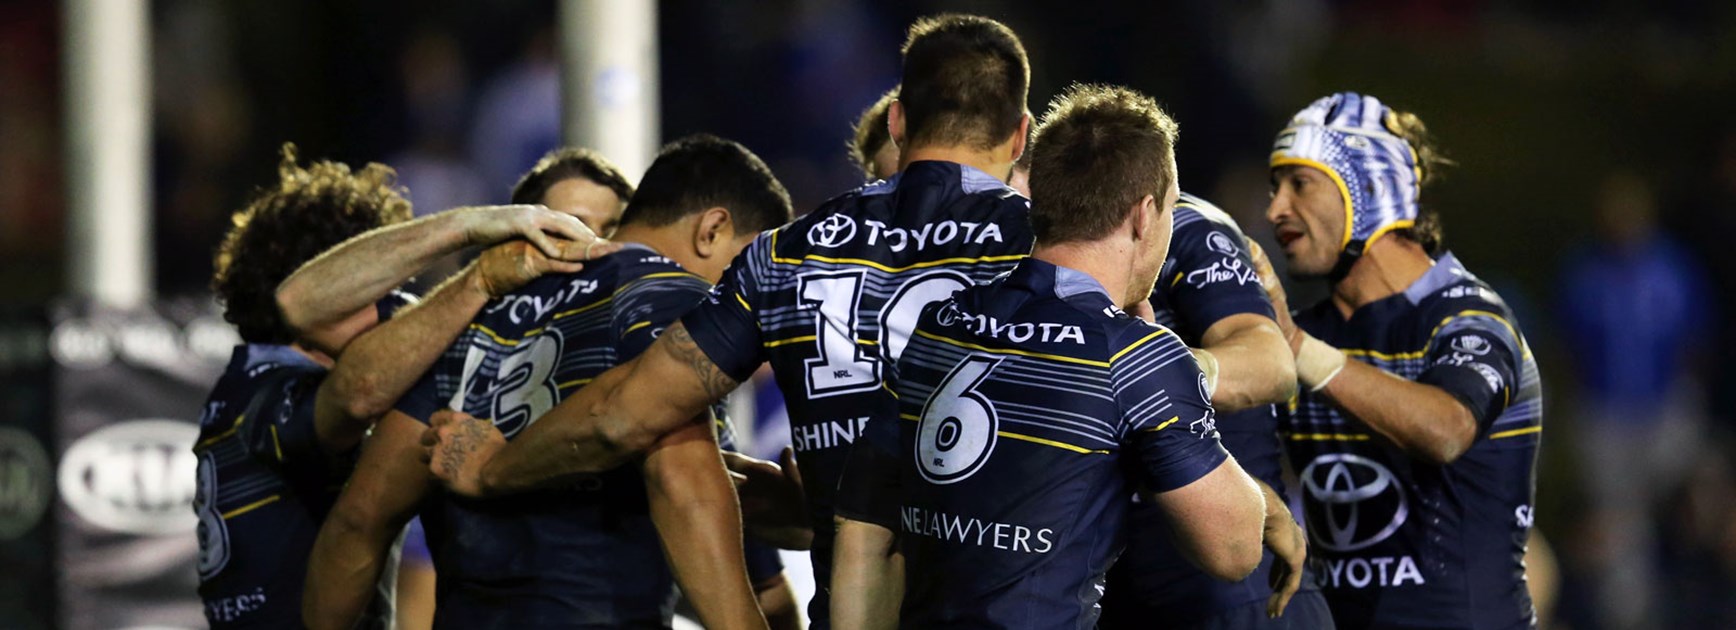 The Cowboys enjoyed a big win over the Bulldogs in Round 25.